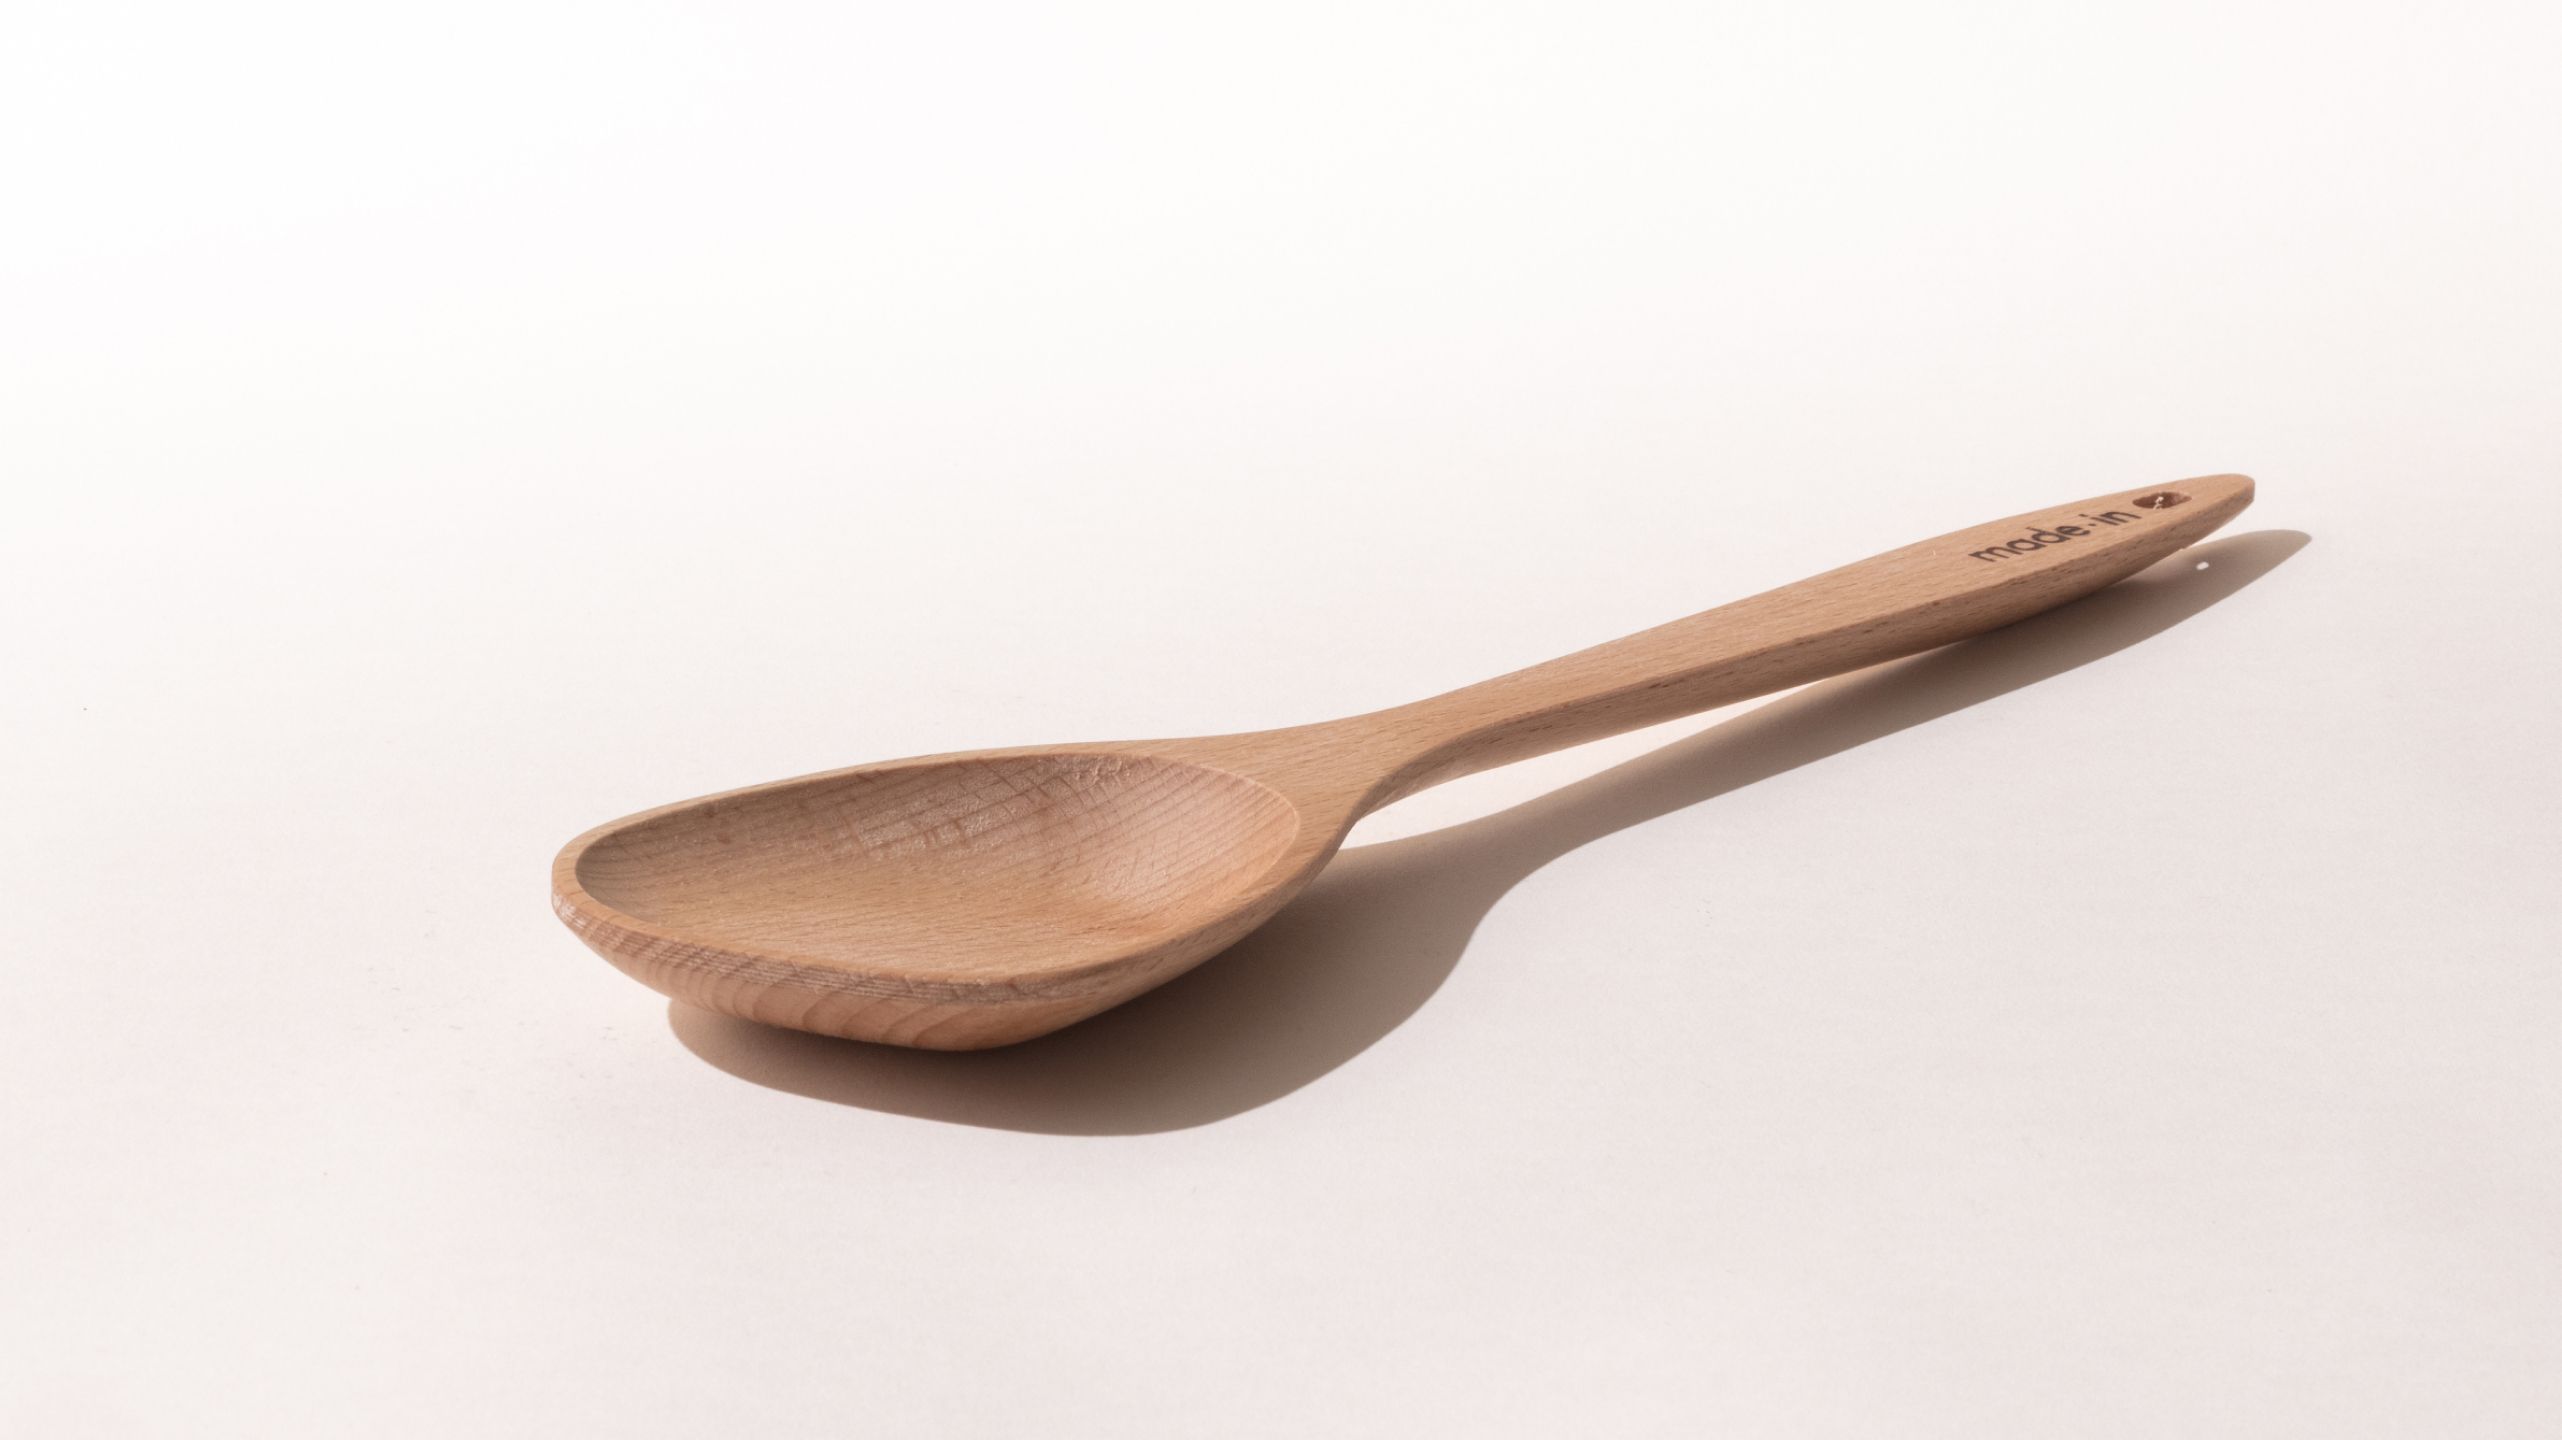 How To Clean Kitchen Wooden Spoons Without Damaging Them